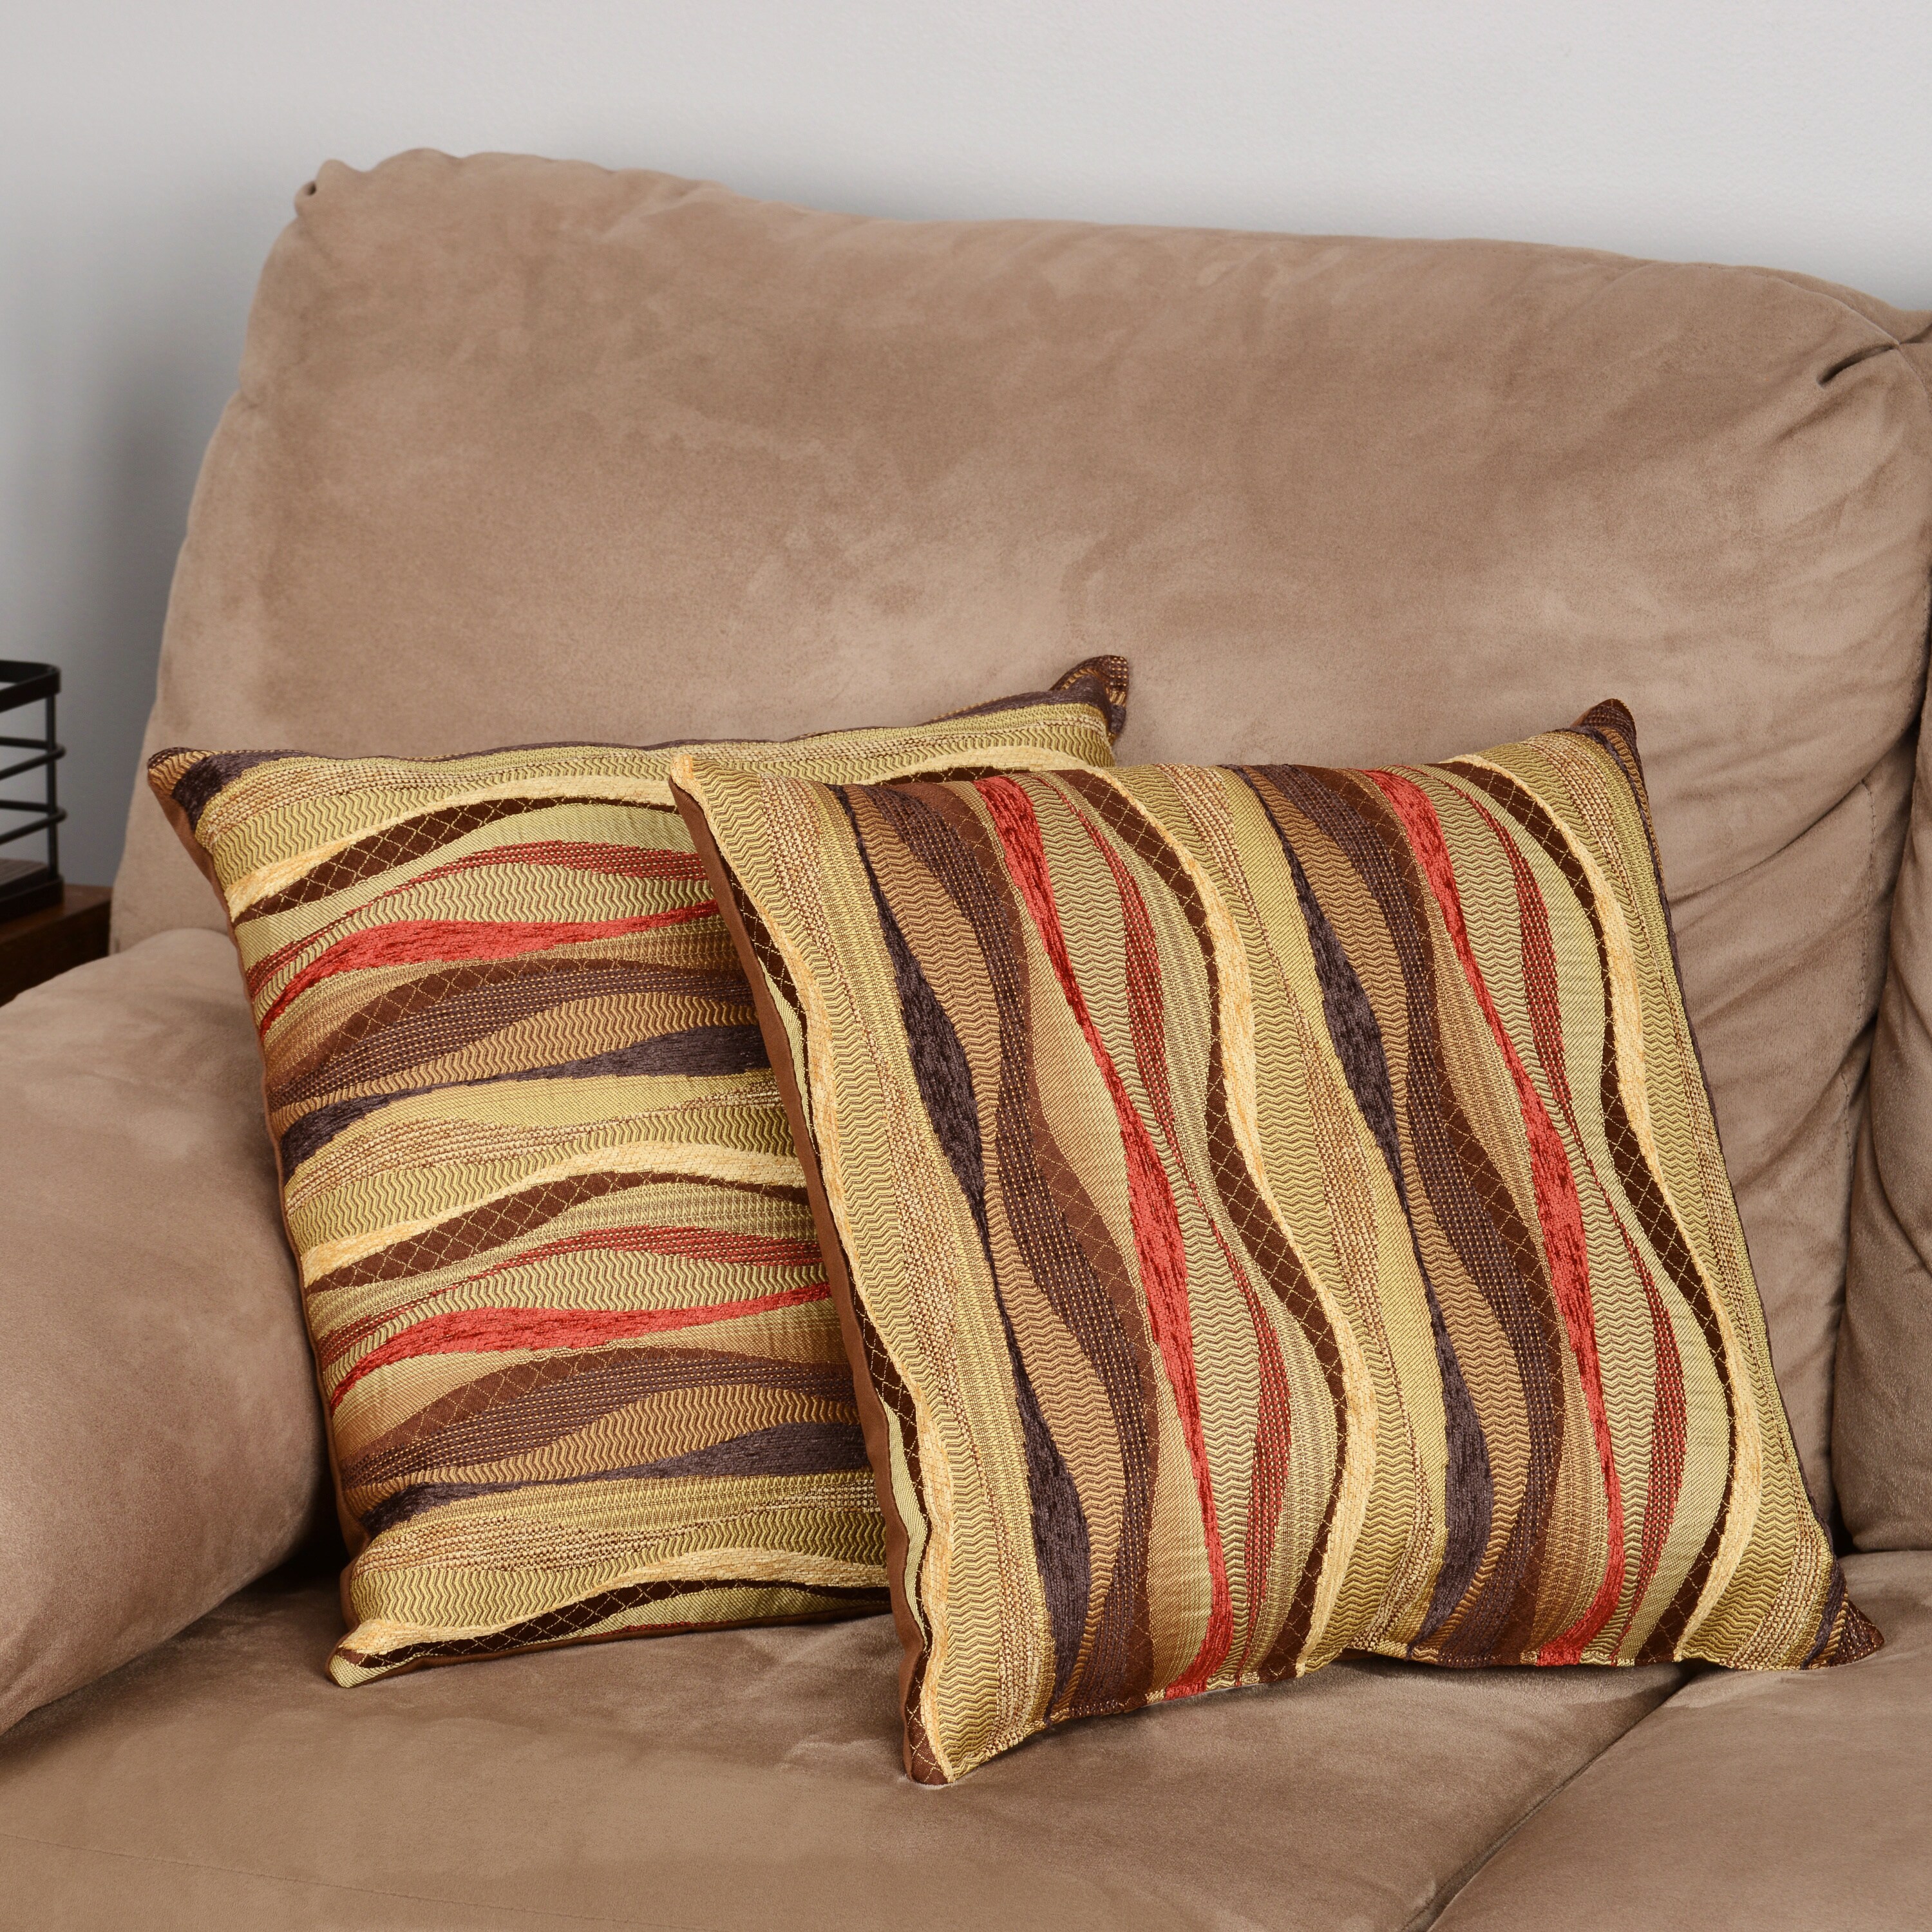 Square Throw Pillows Buy Decorative Accessories